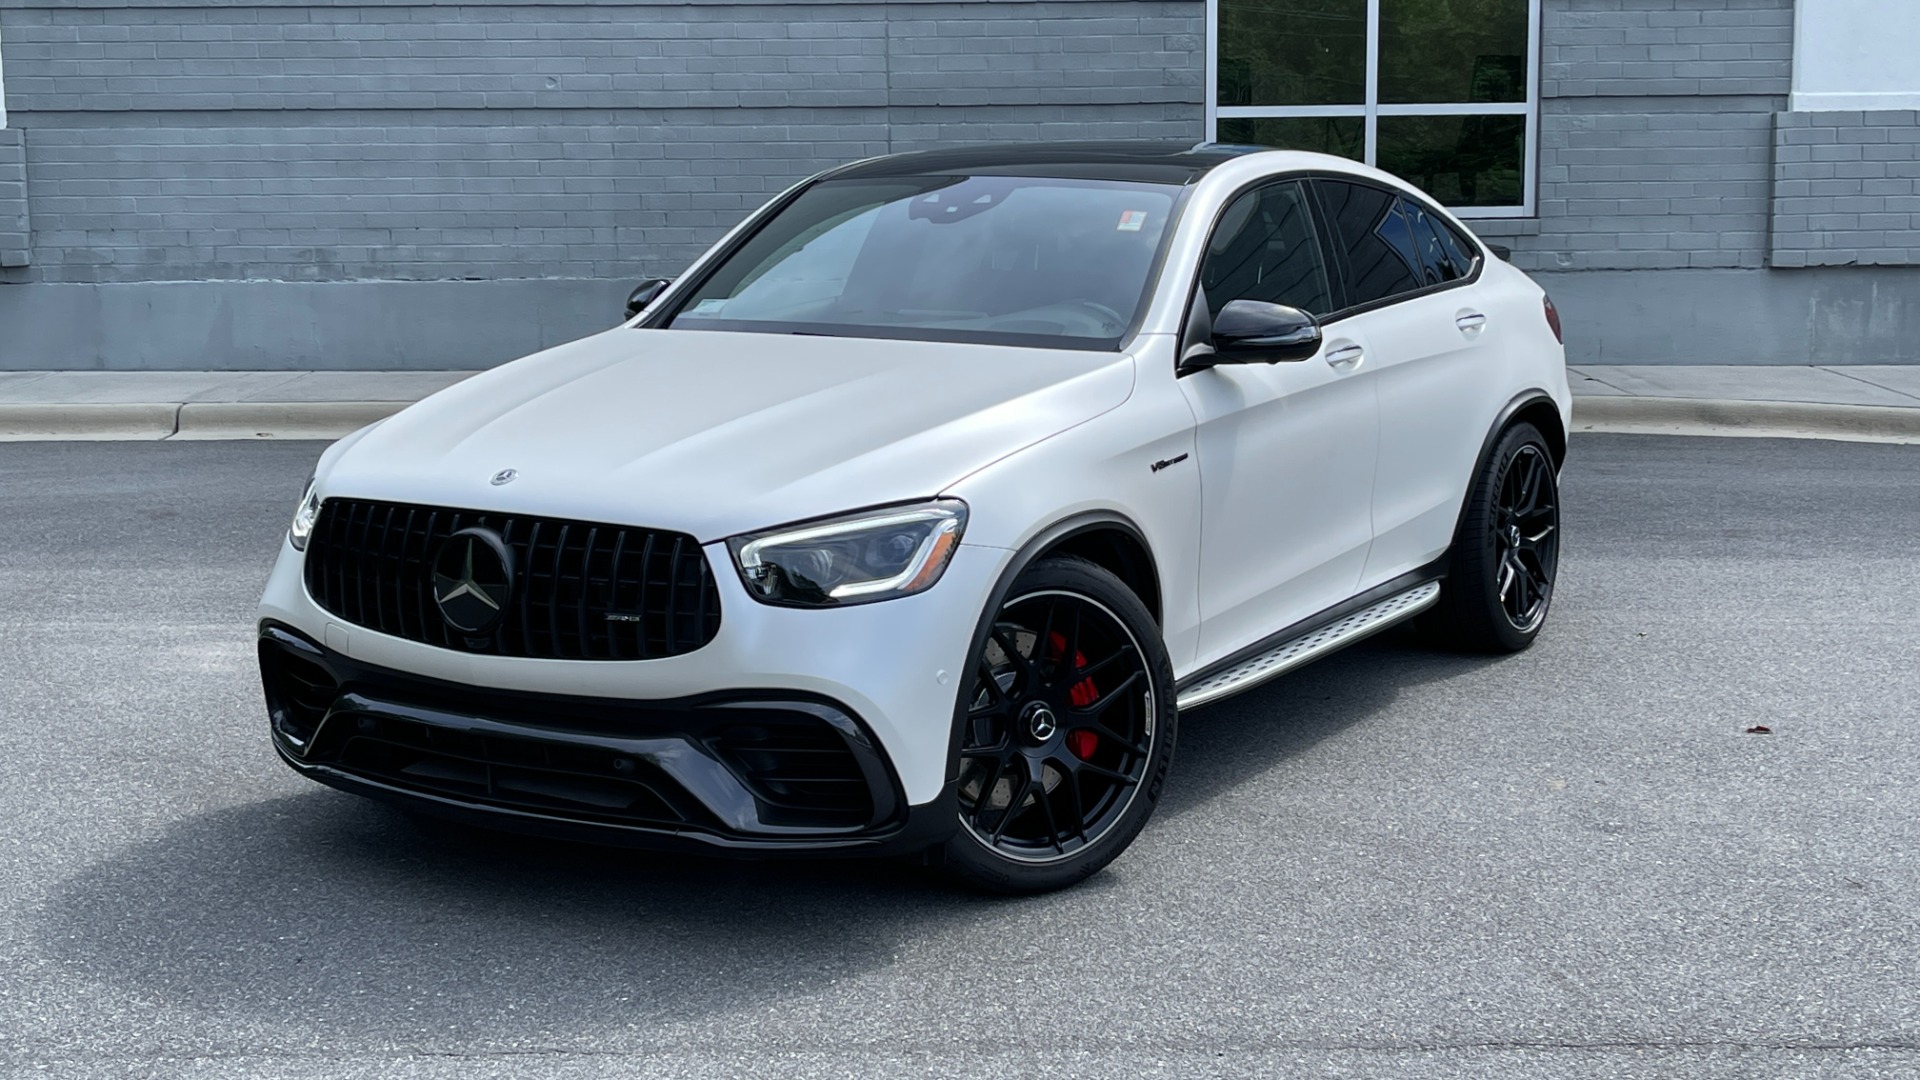 Used 2021 Mercedes-Benz GLC 63 S AMG 503HP SUV / DRVR ASST / LIGHTING / AMG NIGHT for sale $94,995 at Formula Imports in Charlotte NC 28227 2